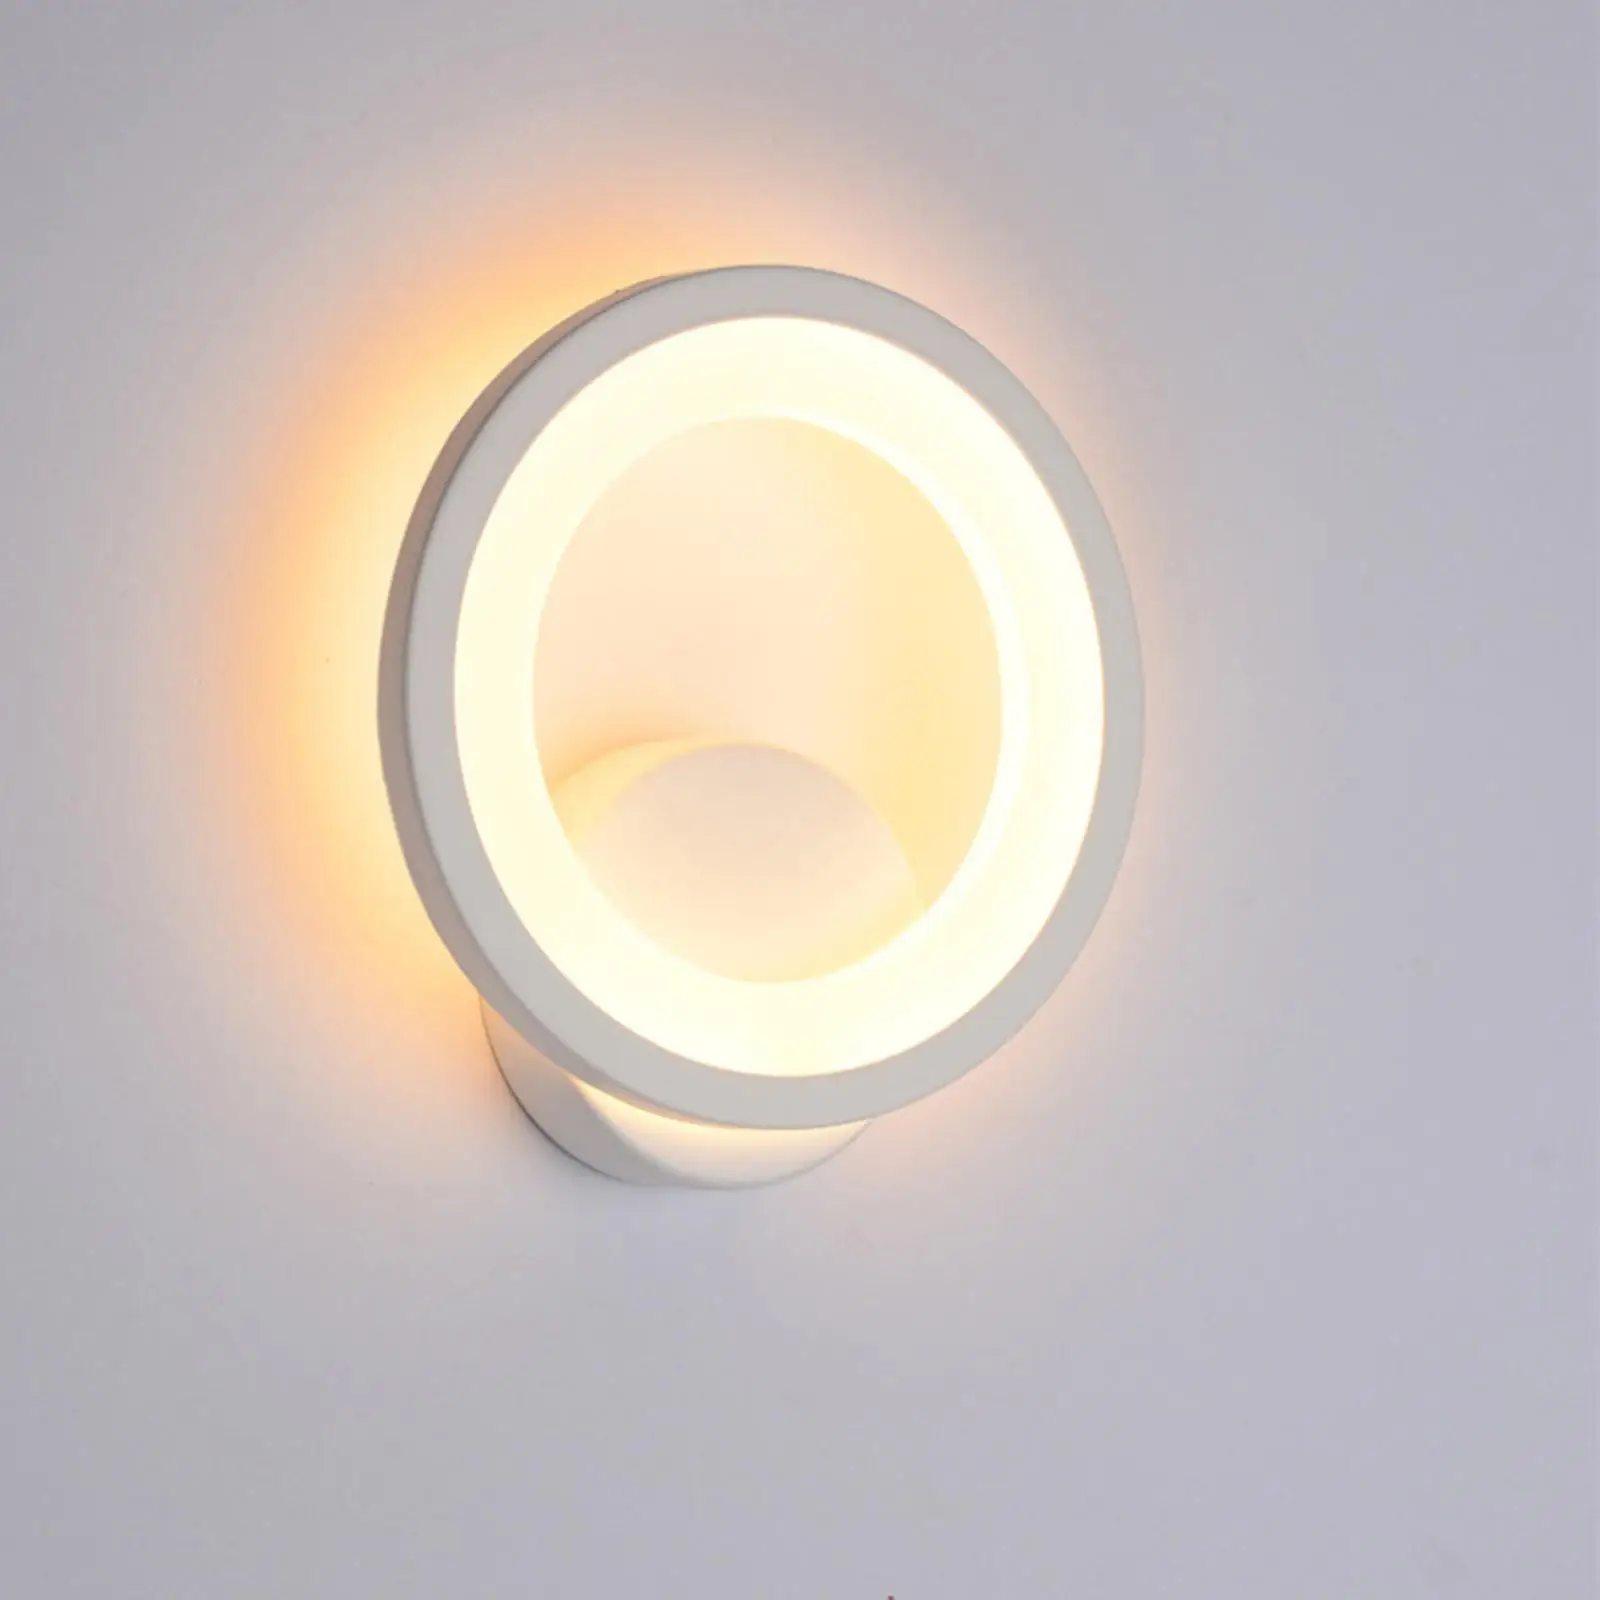 LED Wall Mounted Lamp Acrylic Lampshade Modern Simple Round Wall Sconce Wall Light for Hallway Living Room Corridor Hotel Stairs